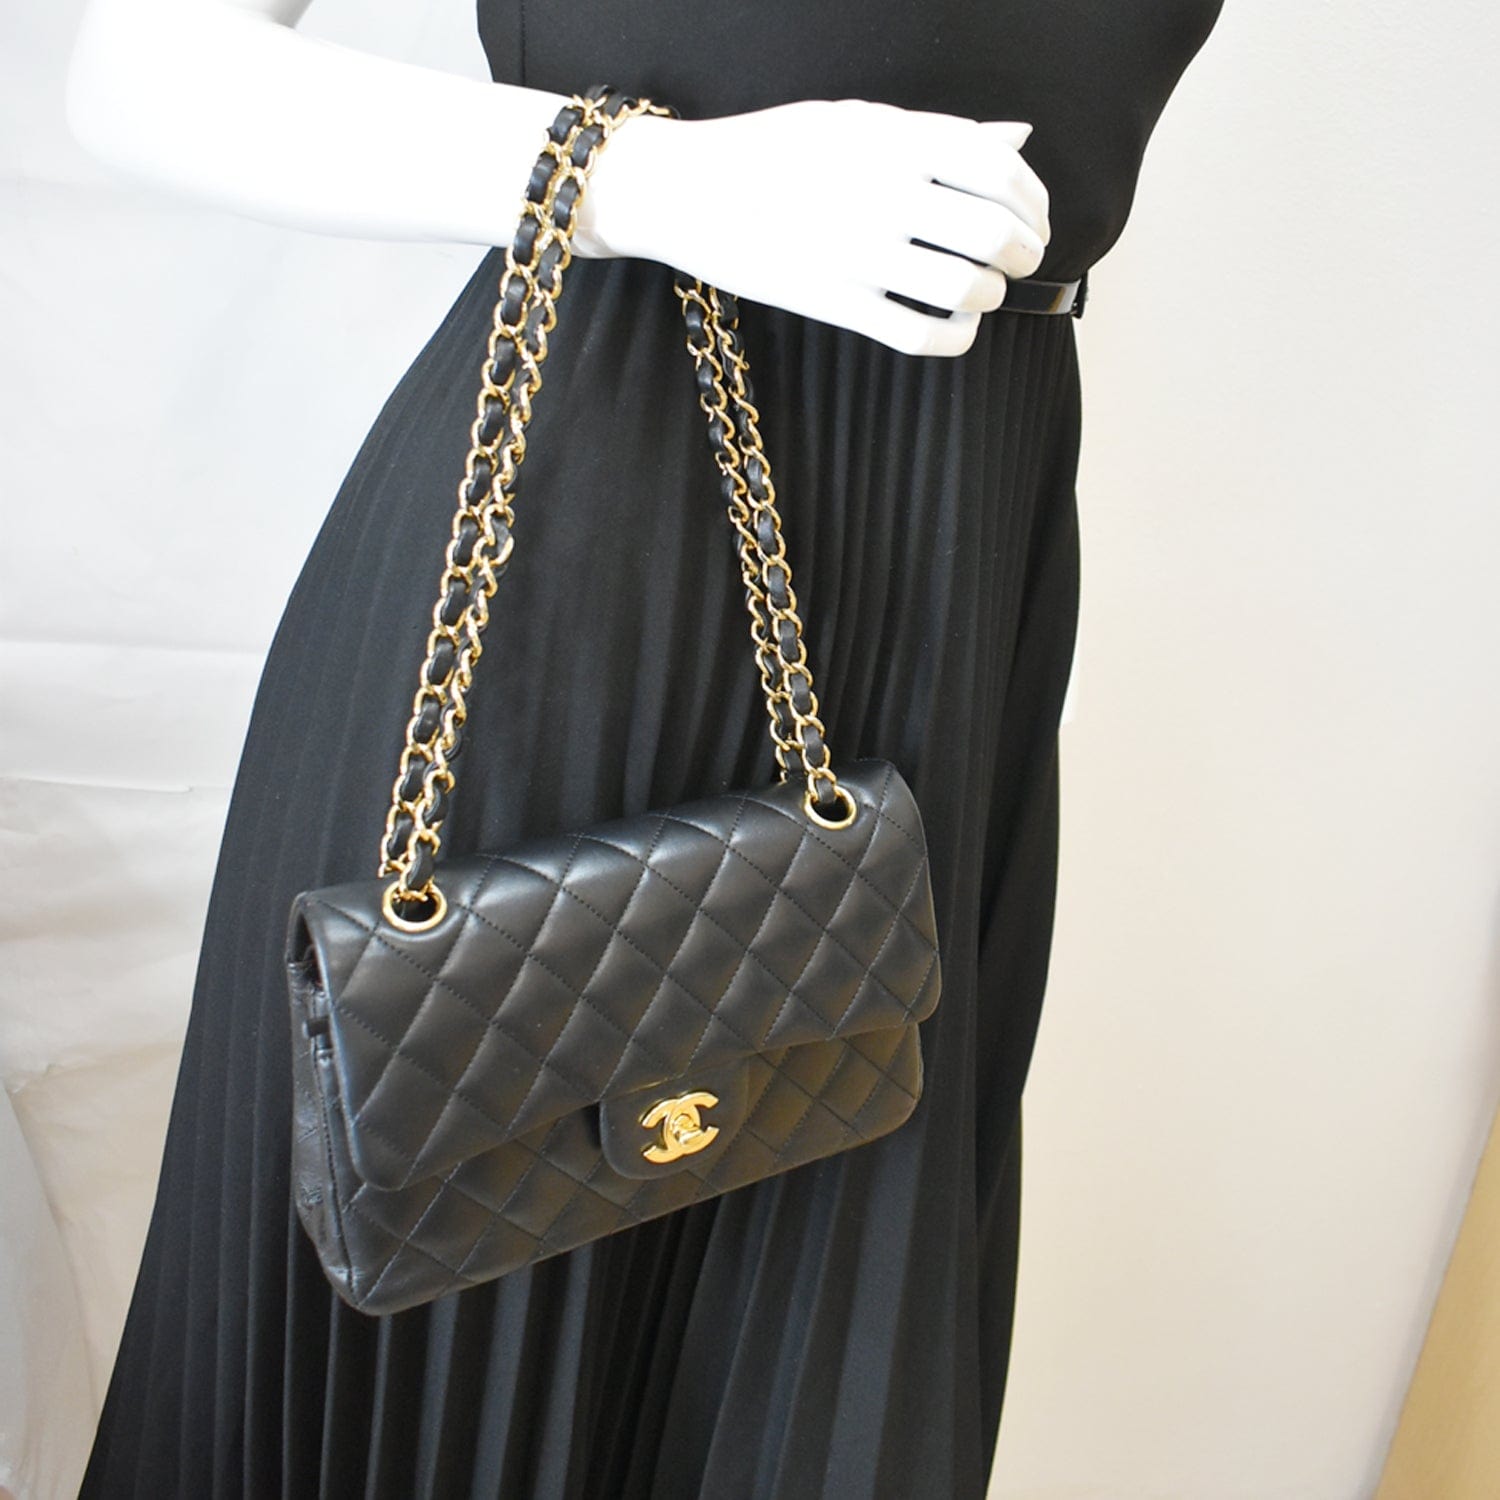 Chanel Black Leather Small Classic Double Flap Shoulder Bag Chanel